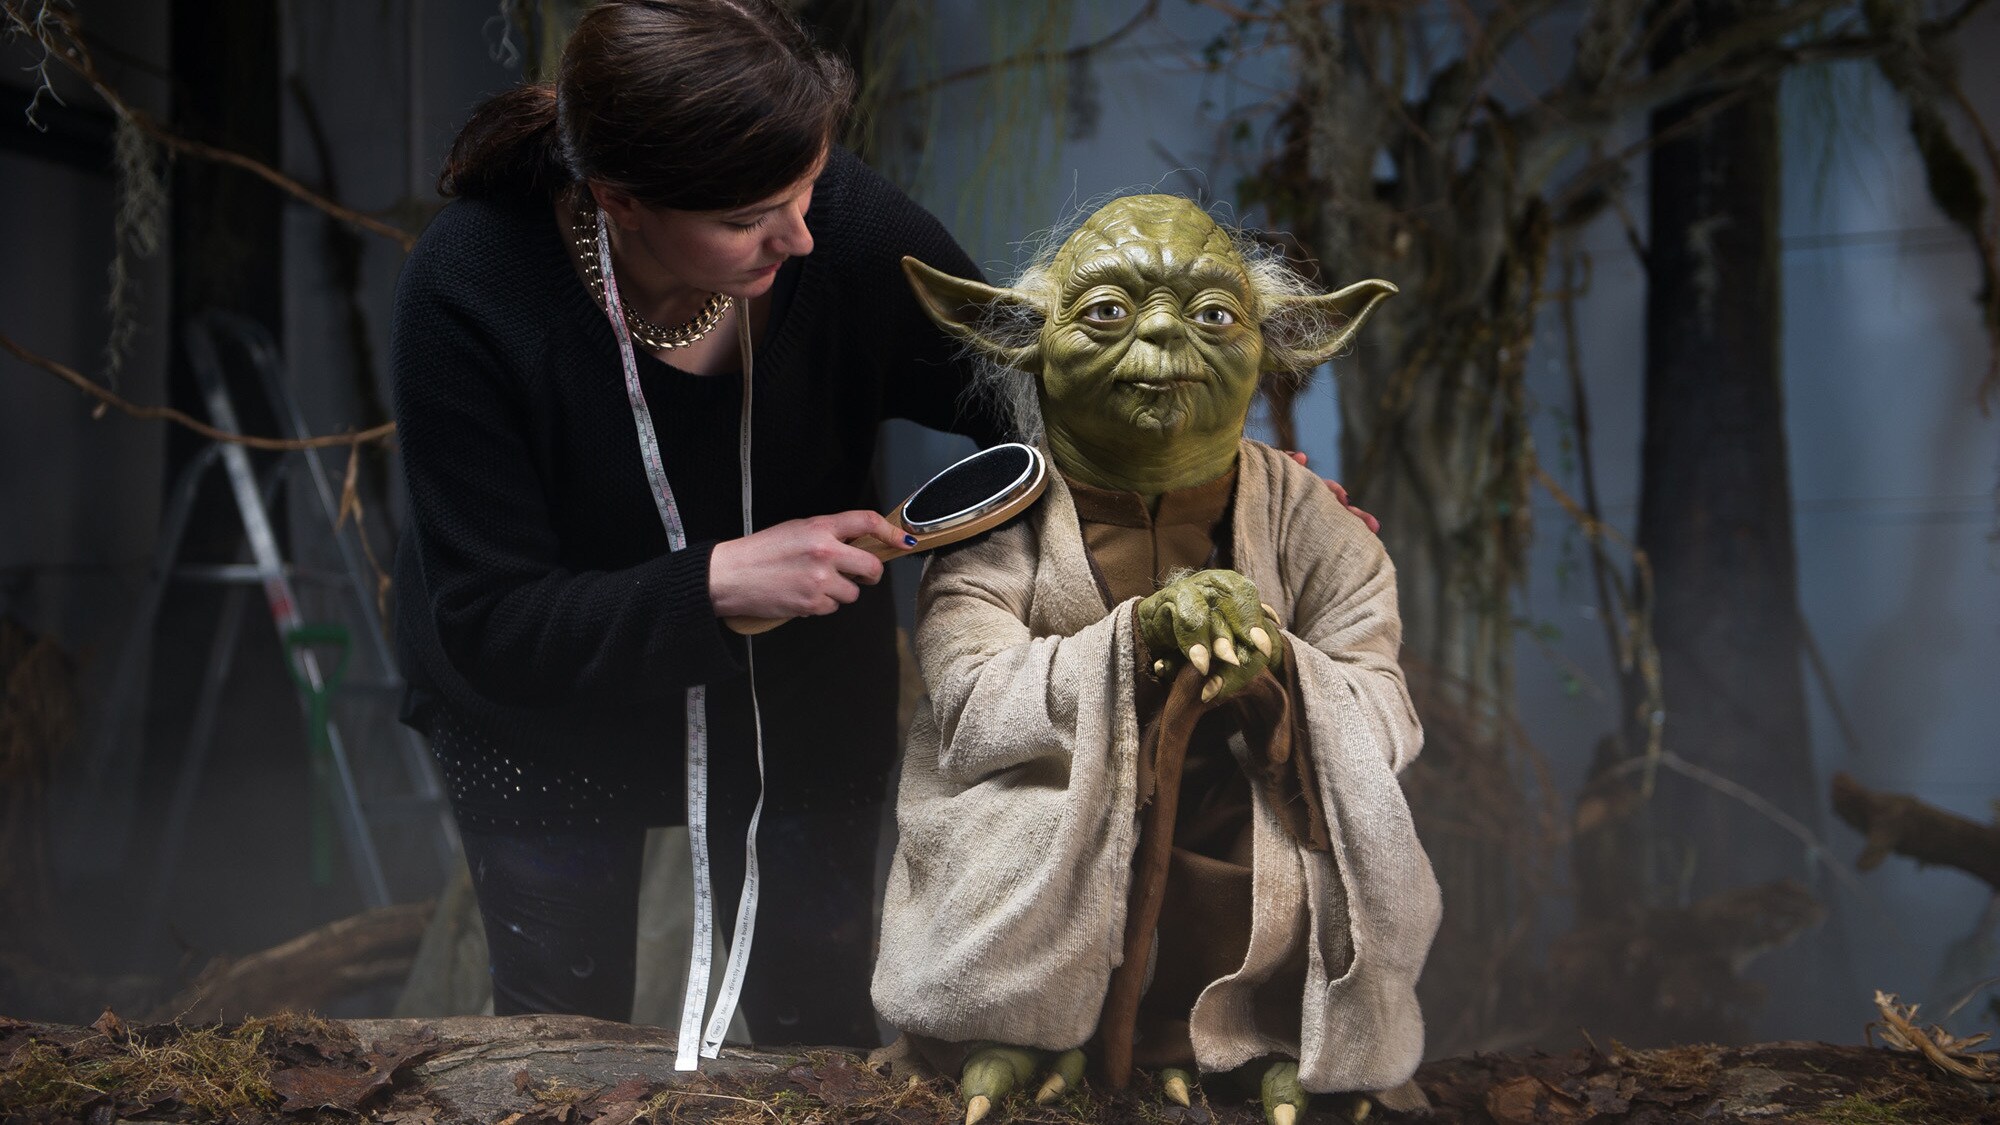 Star Wars at Madame Tussauds - Special Preview!